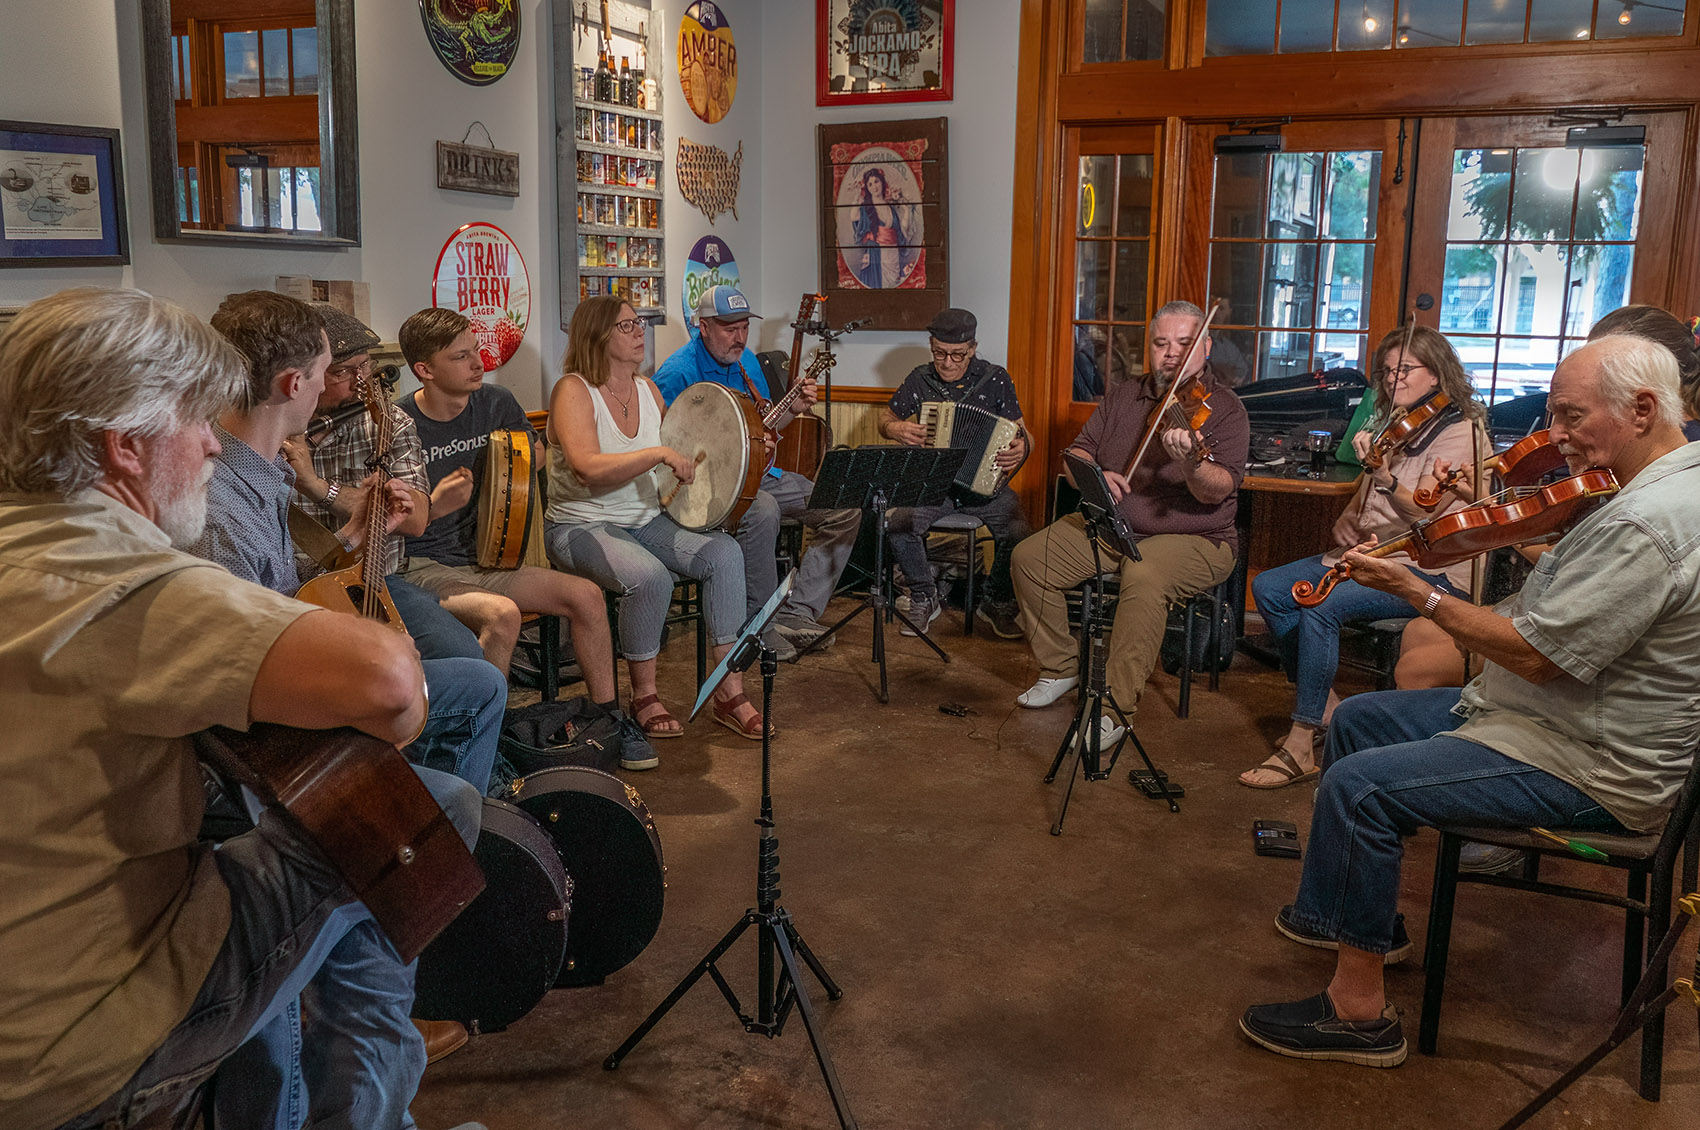 musicians playing acoustic instruments sit in semi-circle to play Louisiana Irish music